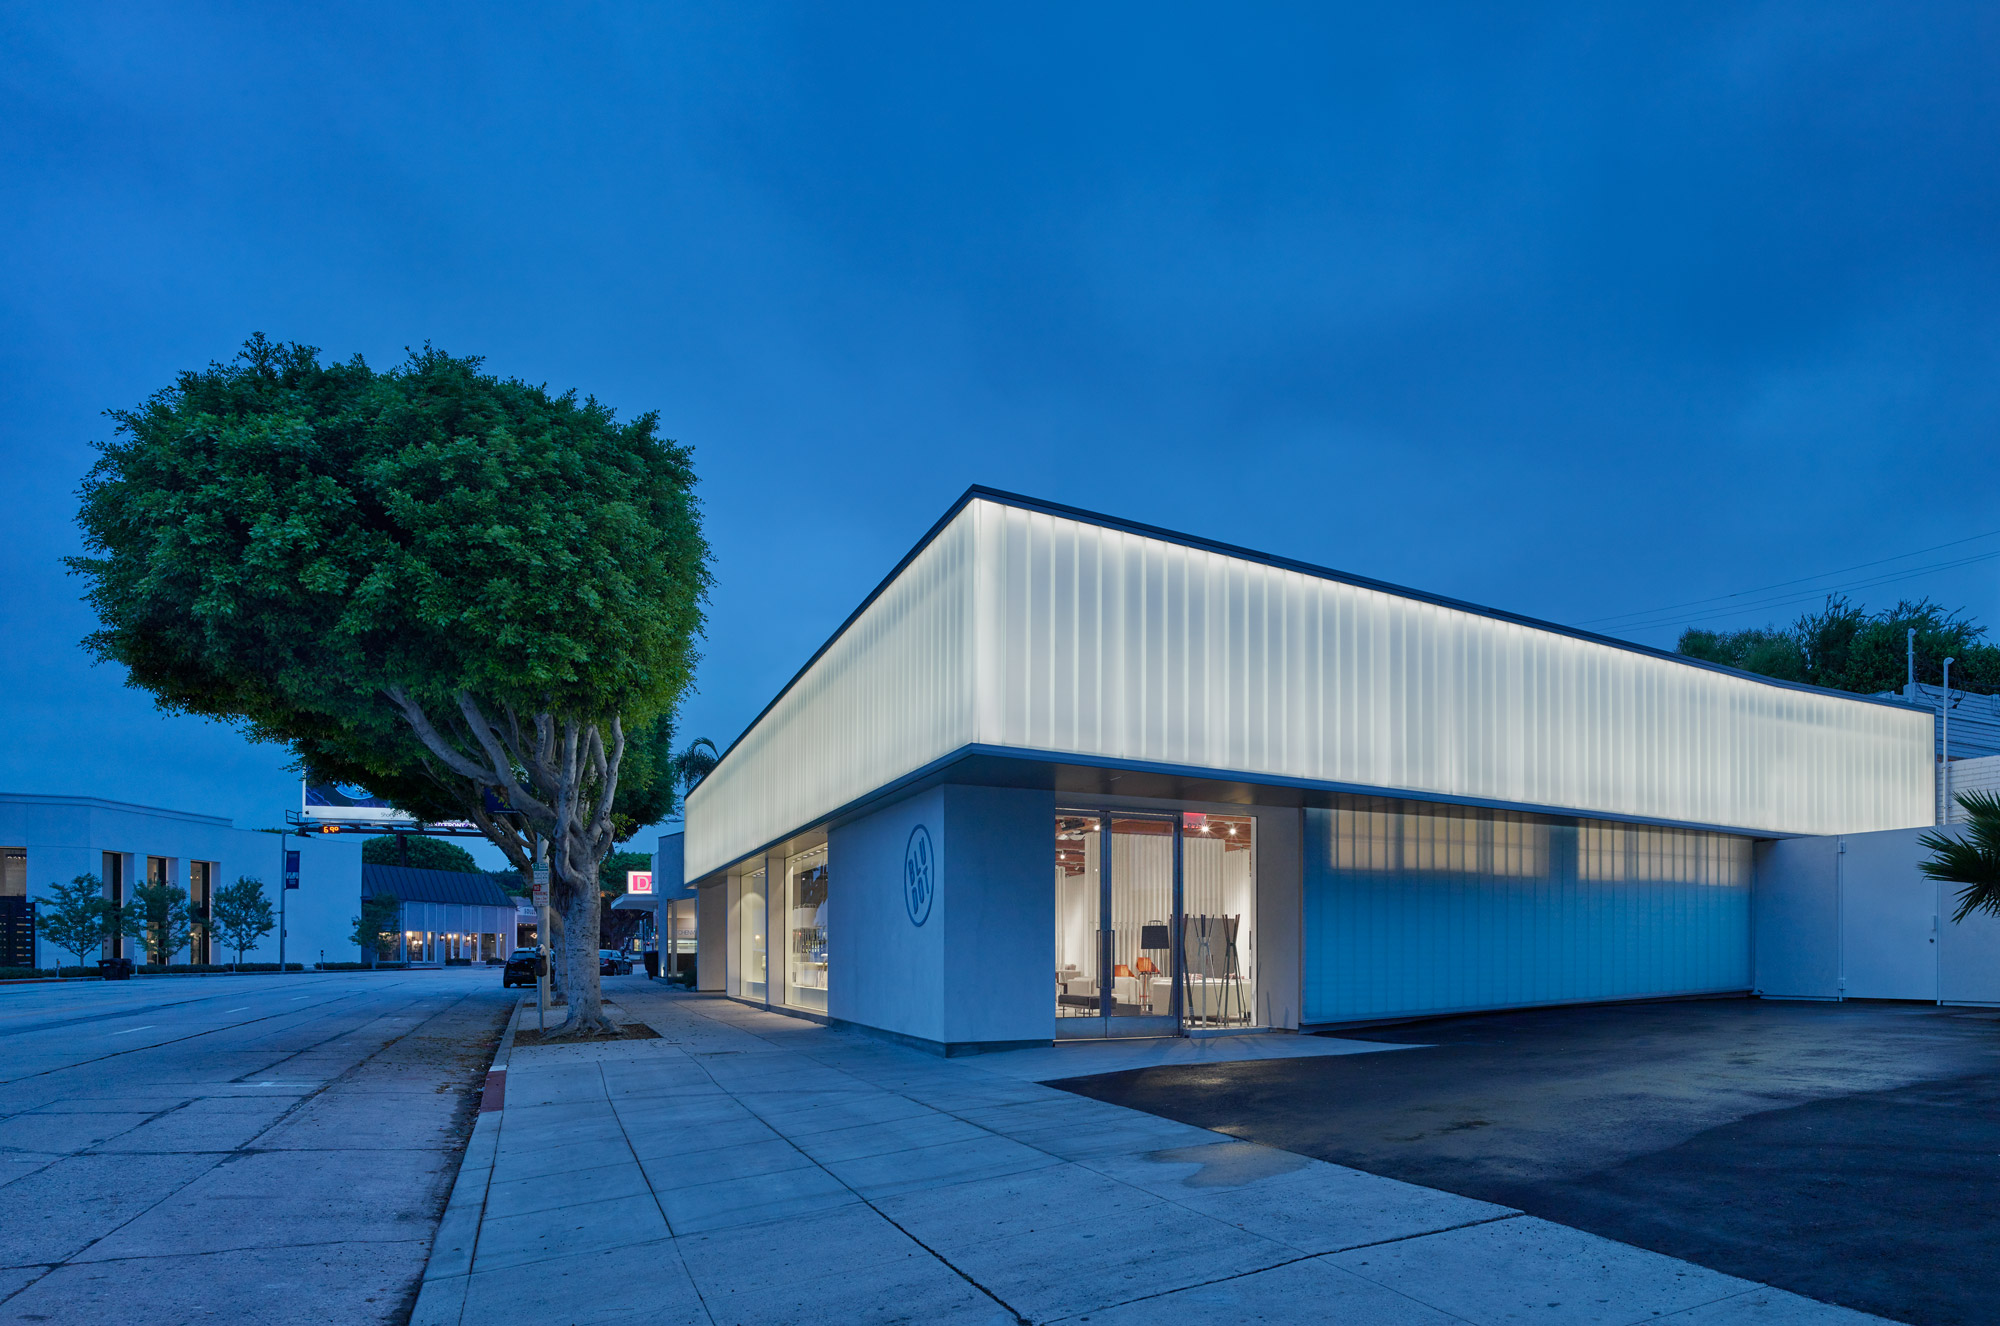 Blu Dot Showroom, West Hollywood, CA by Shawmut Design and Construction. Photo by Benny Chan.